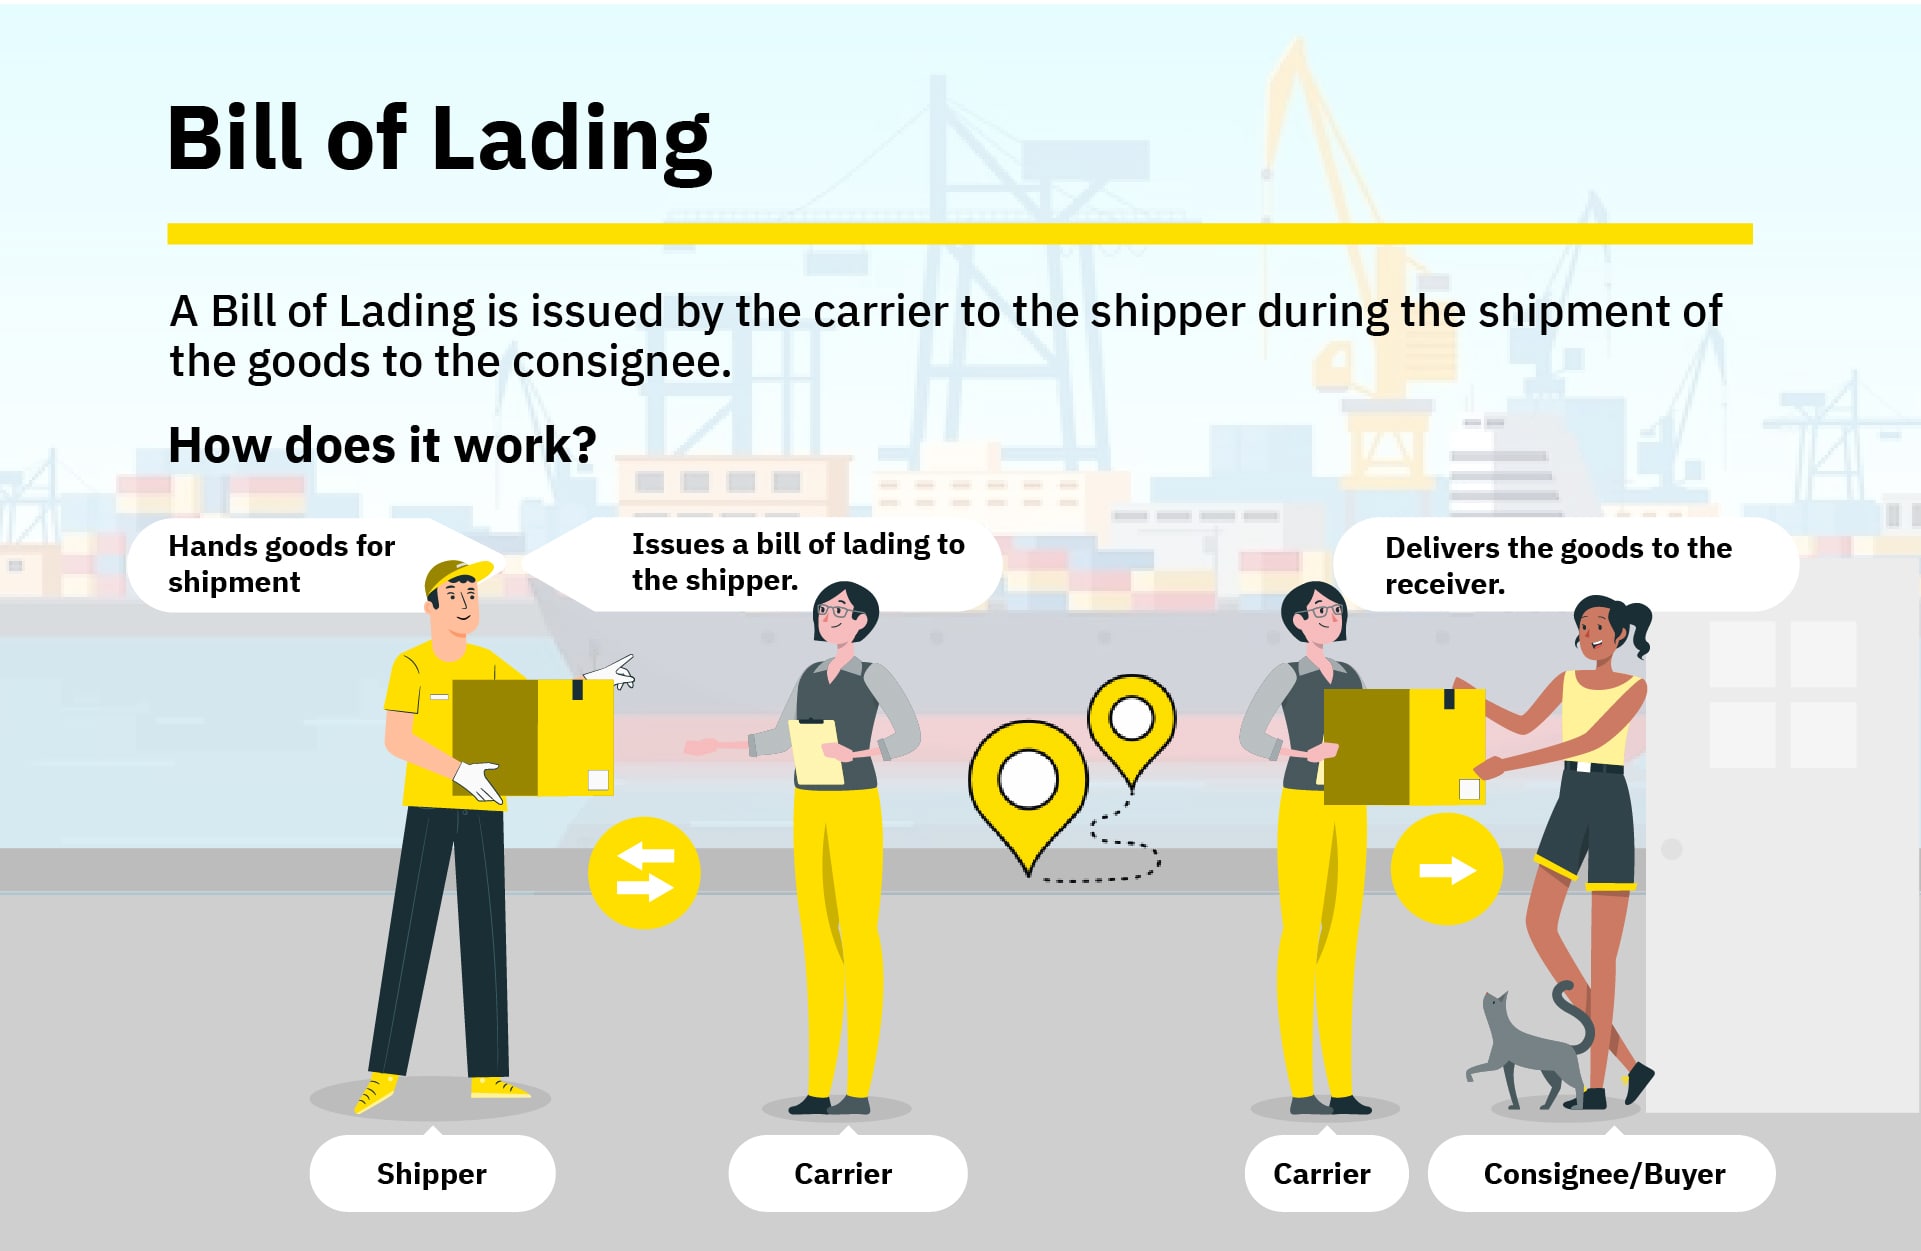 How does Bill of Lading work